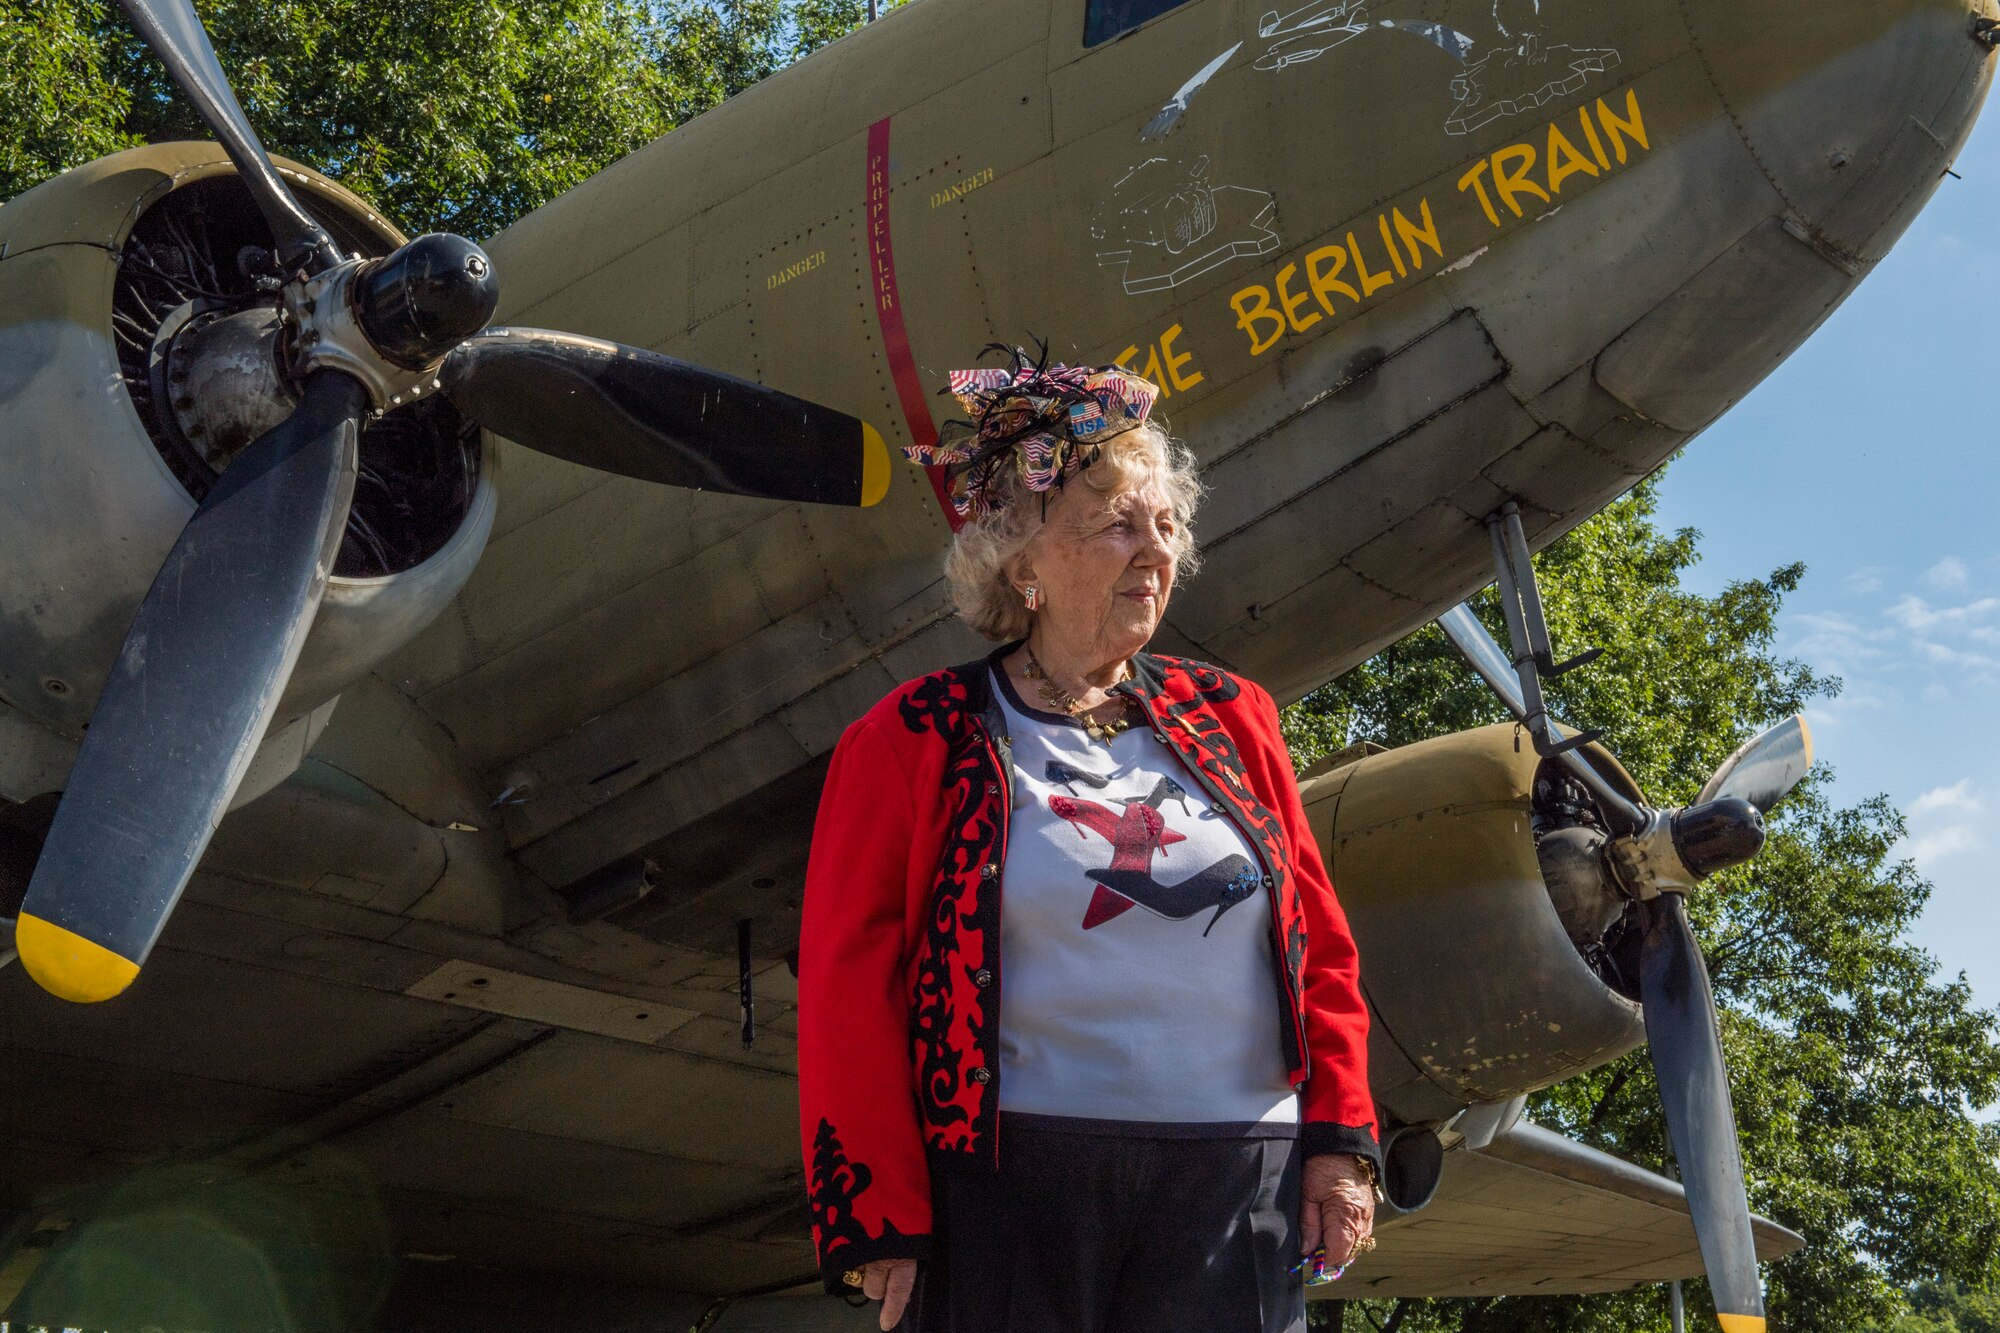 Traute Grier attends the ceremony for the 70th anniversary of the Berlin Airlift, June 26, 2018, in Frankfurt, Germany. Grier was 14 years old during the beginning of the operation. The Berlin Airlift memorial ceremony honored the 70th Anniversary of the beginning of the Berlin Airlift. The event also honored the 101 lives lost from the participating countries. (U.S. Air Force photo by Senior Airman Nick Emerick)